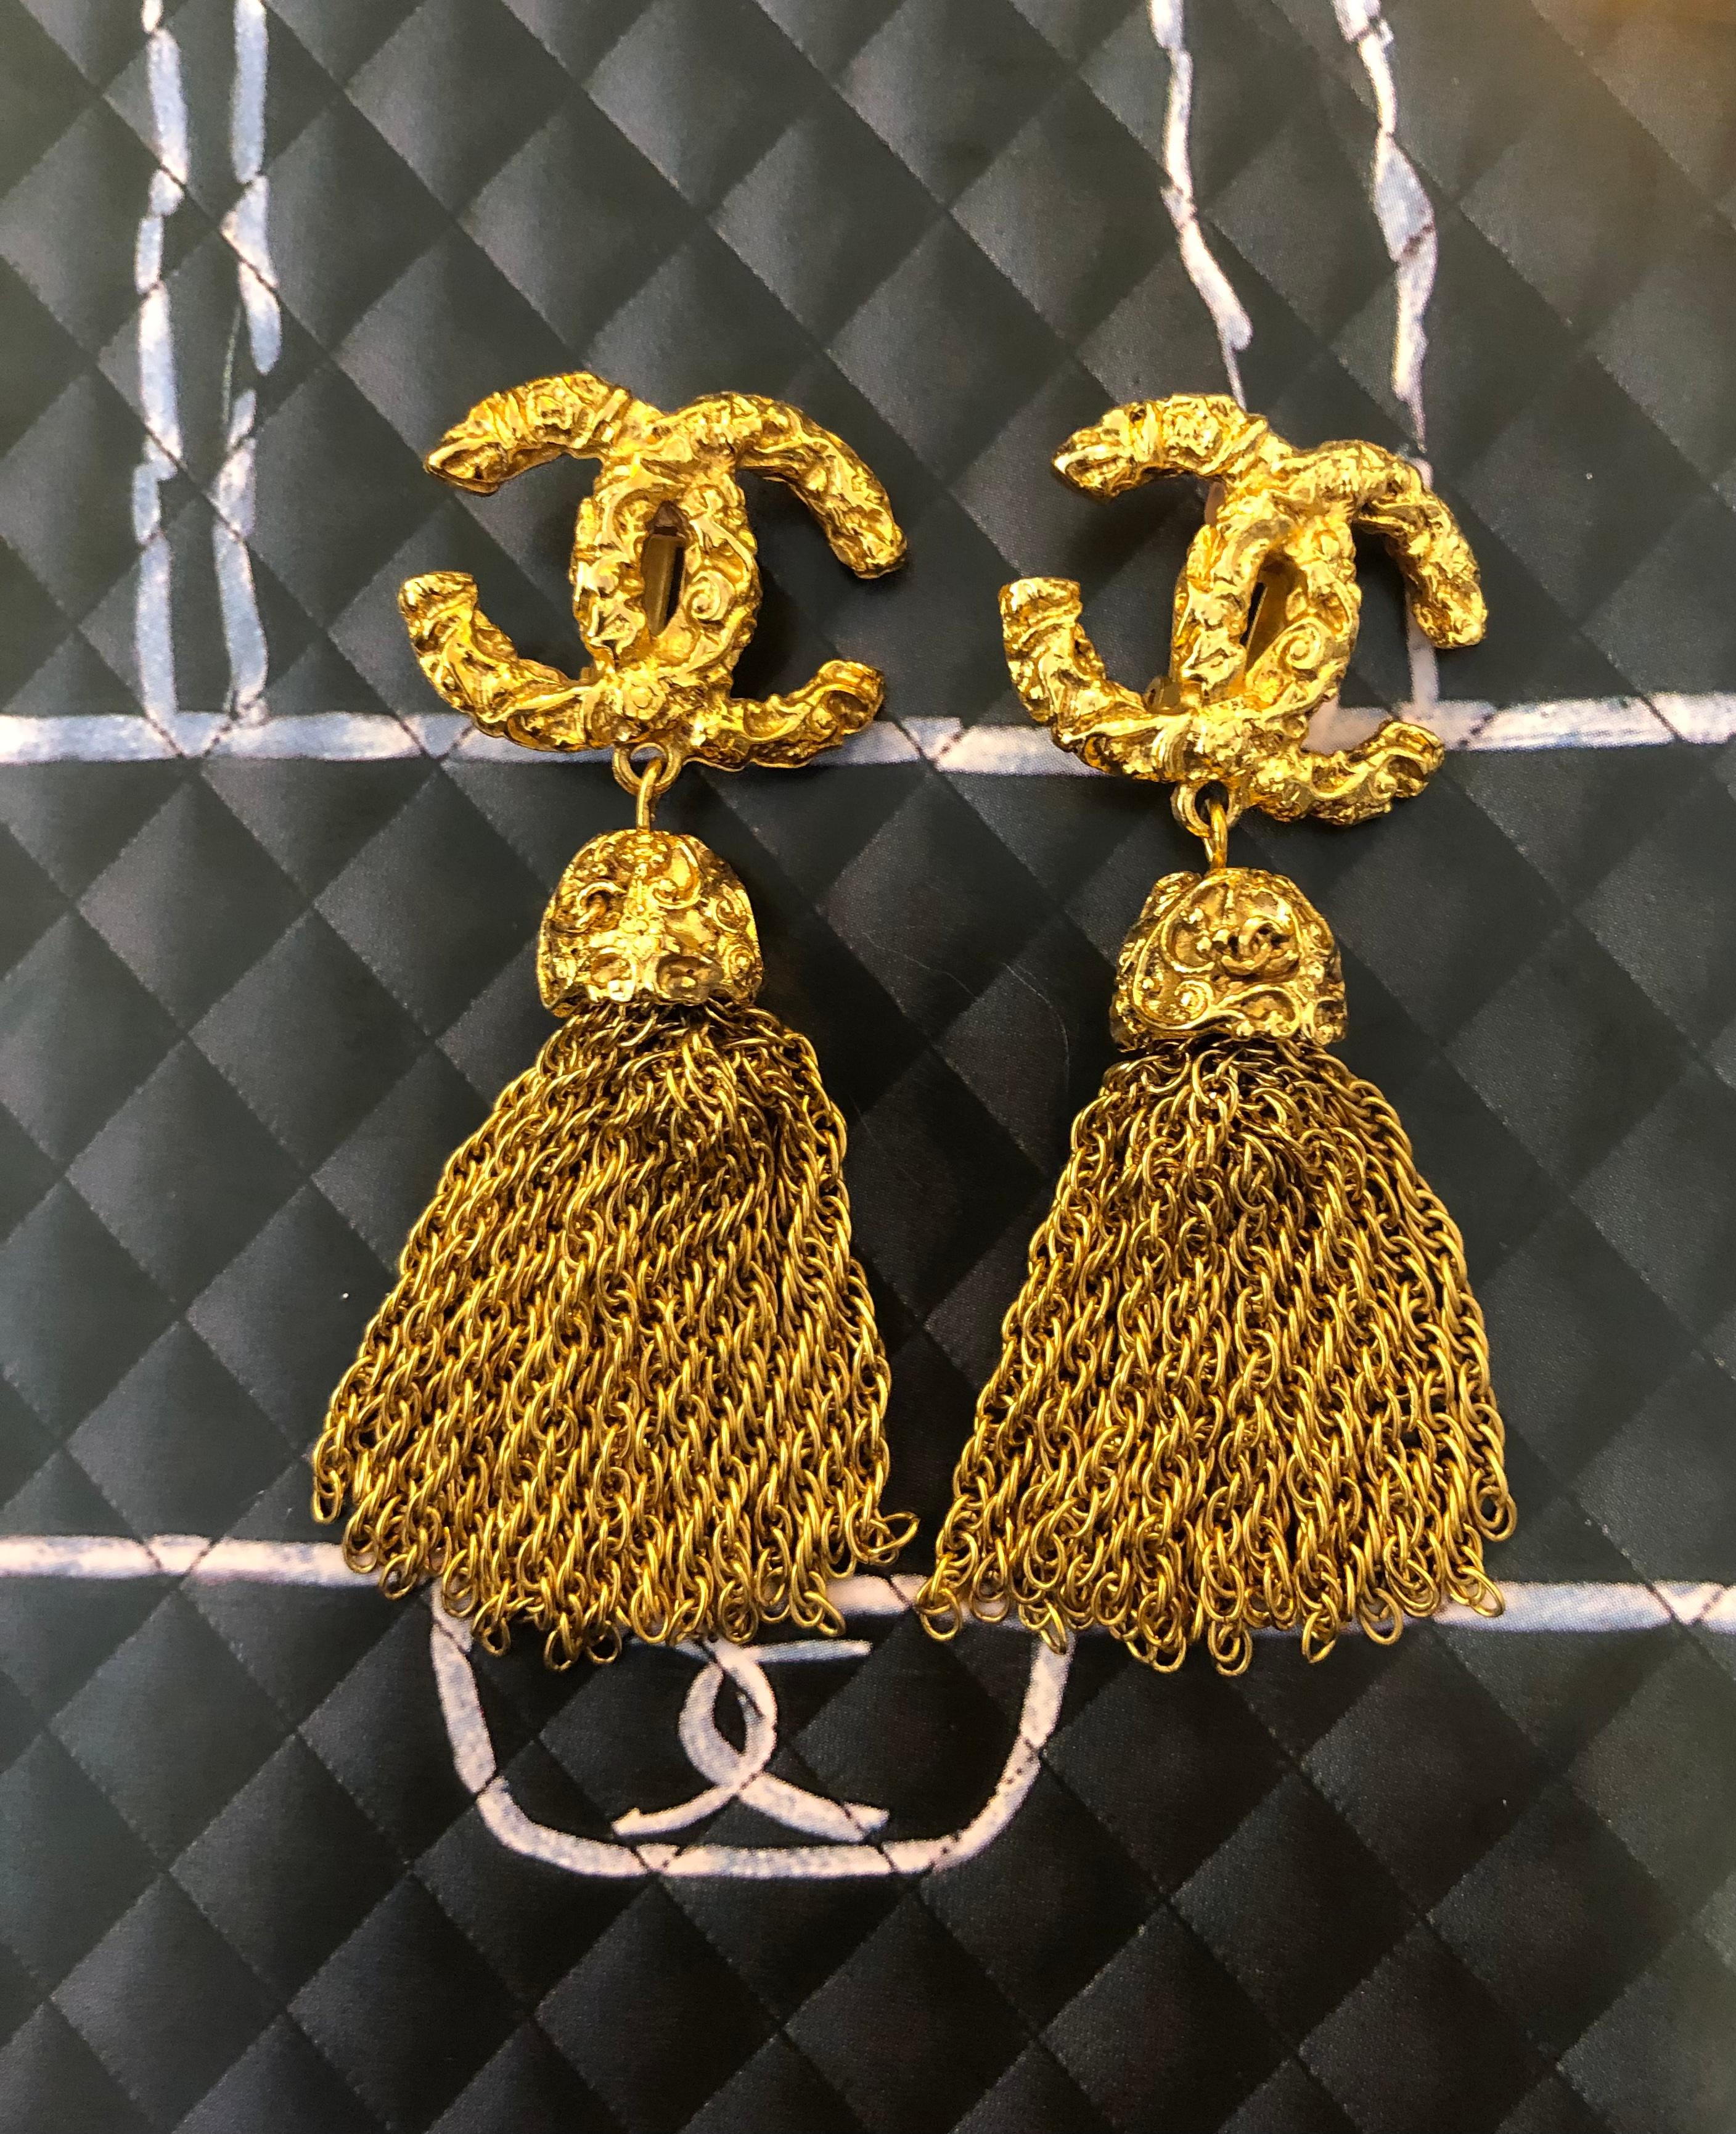 1990s Chanel gold toned clip-on earrings featuring gold toned chain tassels and textured CC logo. Clip on style. Stamped Chanel 93A made in France. Measures 2.5 x 6 cm. Come with box. 

Condition - Minor signs of wear. Generally in good condition. 